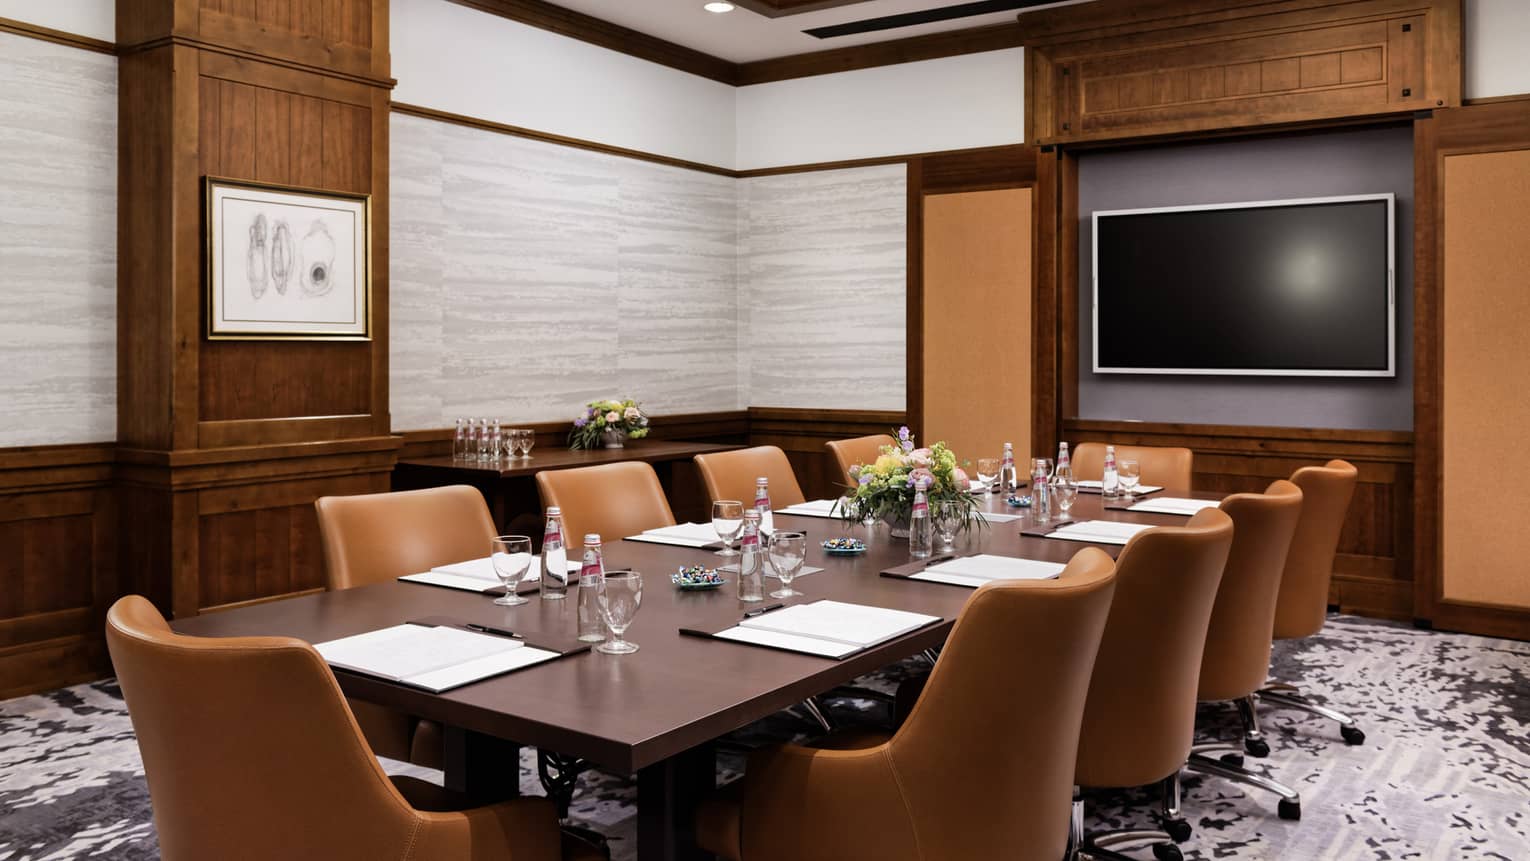 A meeting room with a long table, brown chairs and a screen on the wall.